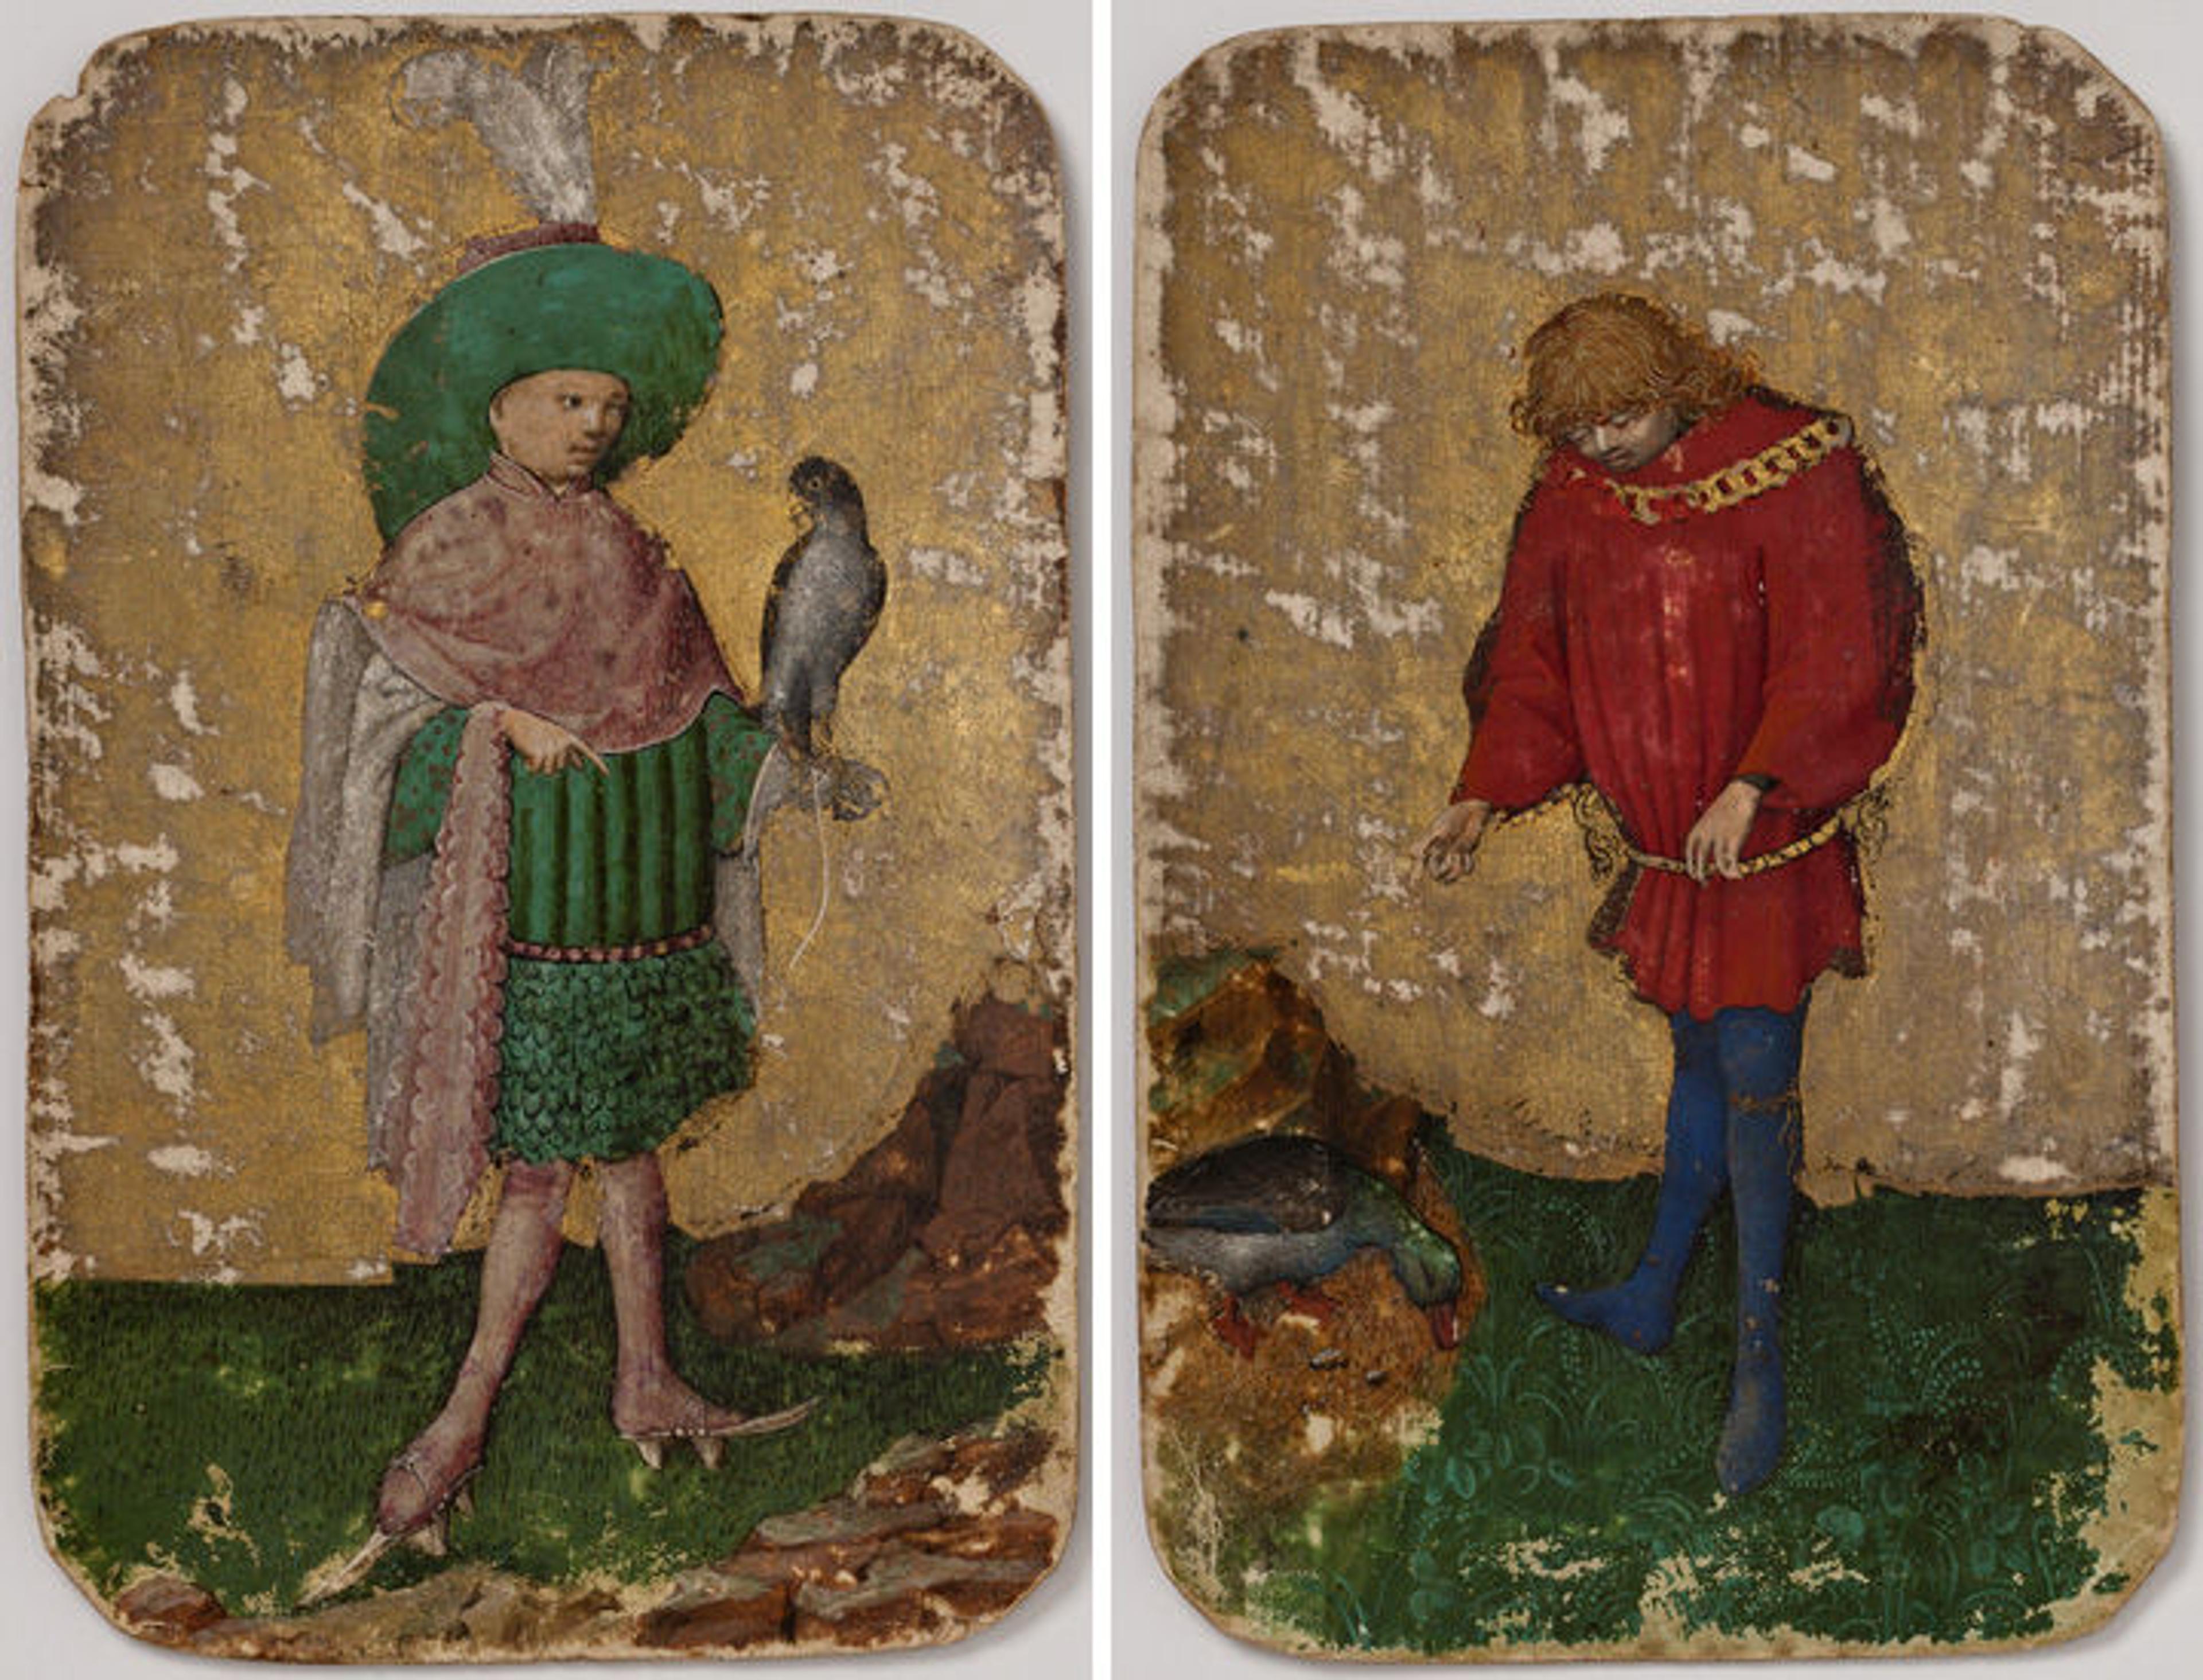 Upper Knave of Falcons, from The Stuttgart Playing Cards, ca. 1430. Made in Upper Rhineland, Germany. Paper (six layers in pasteboard) with gold ground and opaque paint over pen and ink; 7 1/2 x 4 3/4 in. (19.1 x 12.1 cm). Landesmuseum Württemberg, Stuttgart (KK grau 53) Under Knave of Ducks, from The Stuttgart Playing Cards, ca. 1430. Made in Upper Rhineland, Germany. Paper (six layers in pasteboard) with gold ground and opaque paint over pen and ink; 7 1/2 x 4 3/4 in. (19.1 x 12.1 cm). Landesmuseum Württemberg, Stuttgart (KK grau 42)